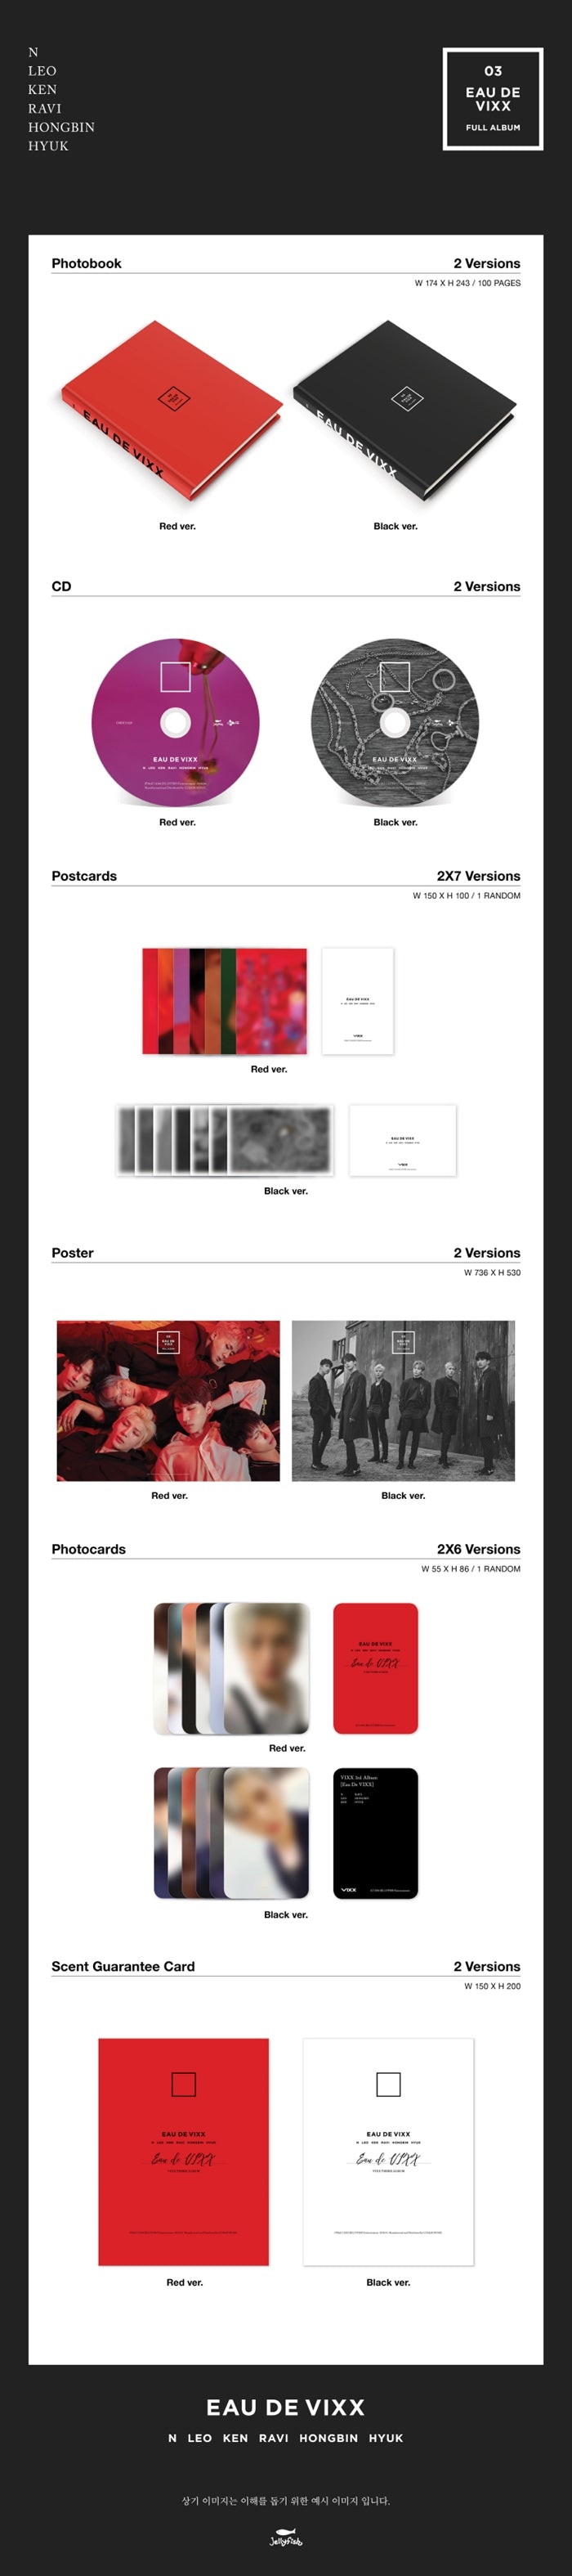 1 CD
1 Photo Book (100 pages)
1 Photo Card
1 Postcard
1 Scent Guarantee Card